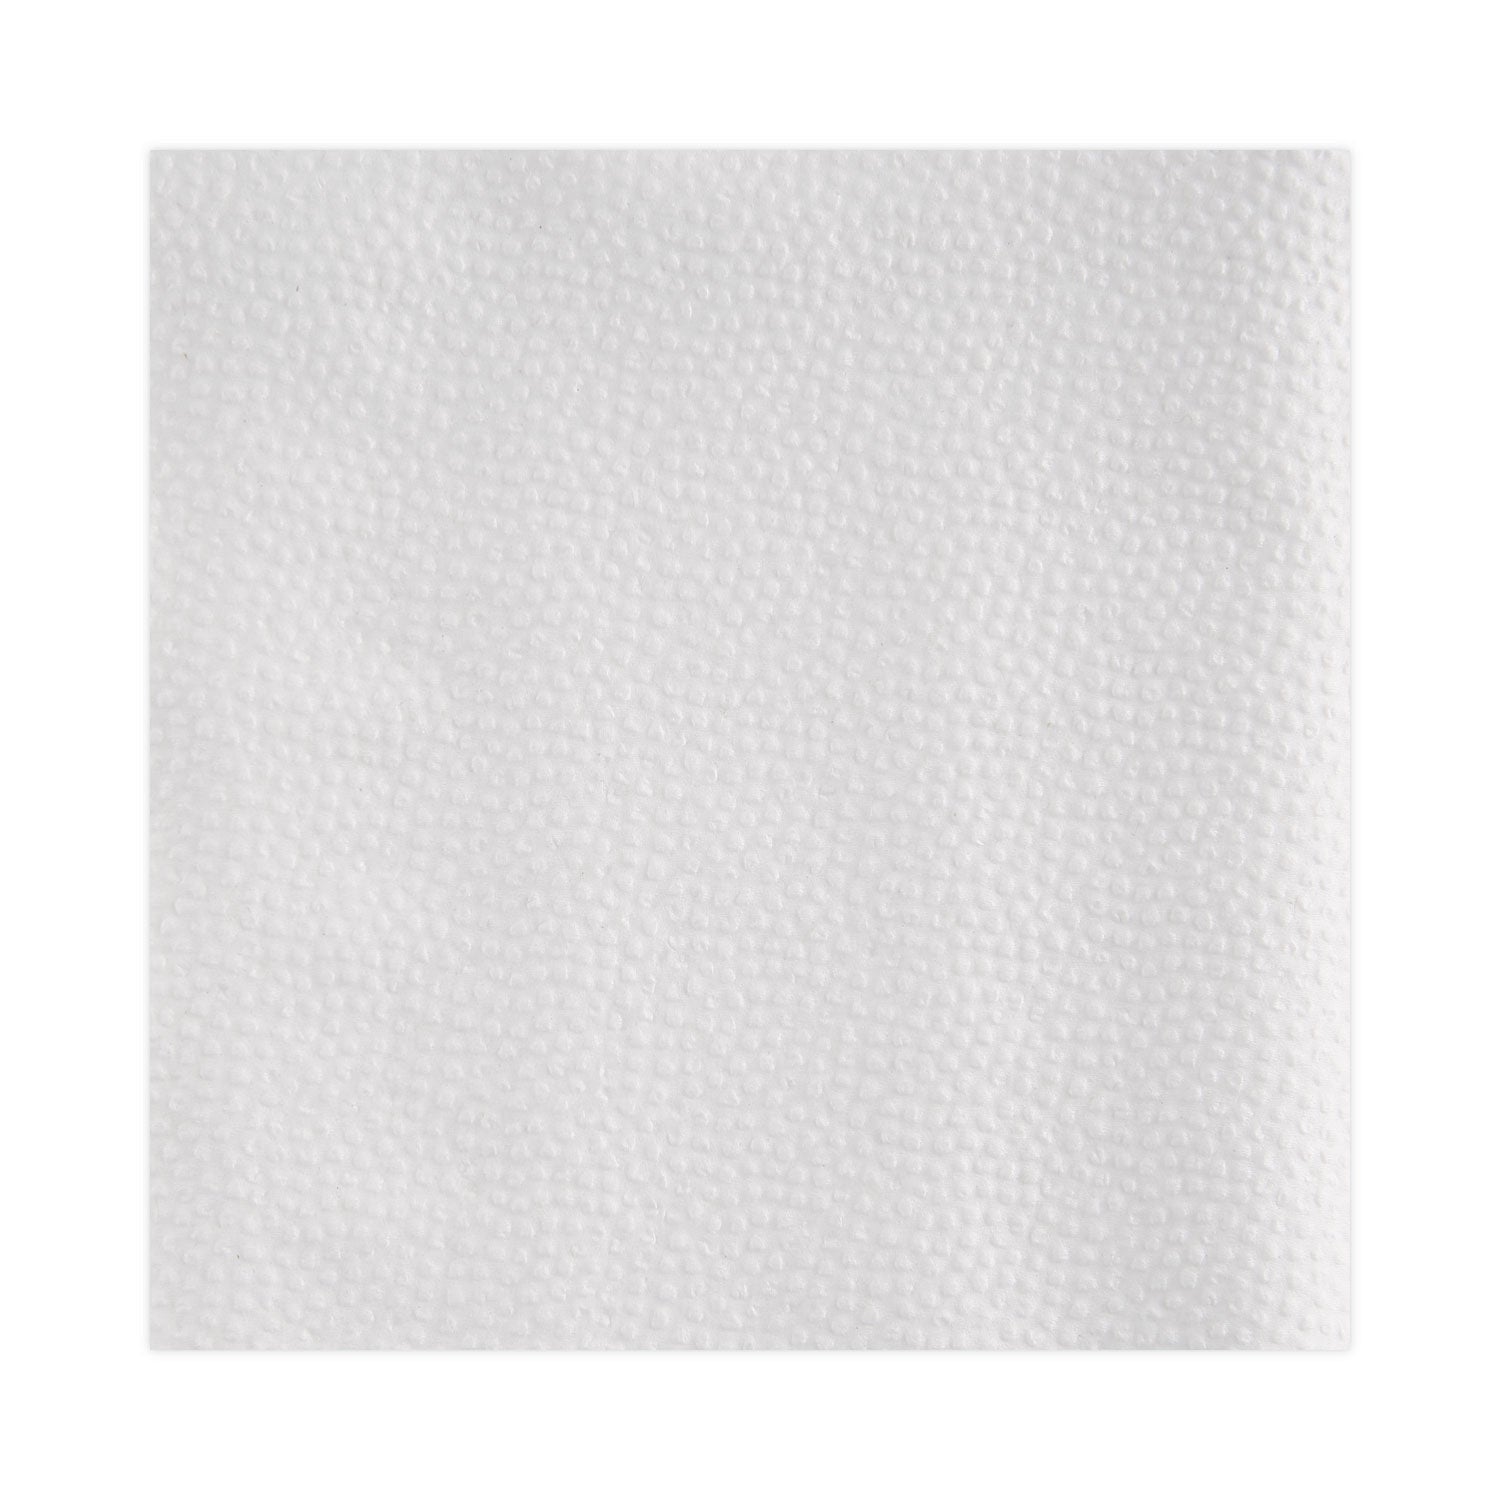 office-packs-lunch-napkins-1-ply-12-x-12-white-400-pack_bwk8311pk - 4